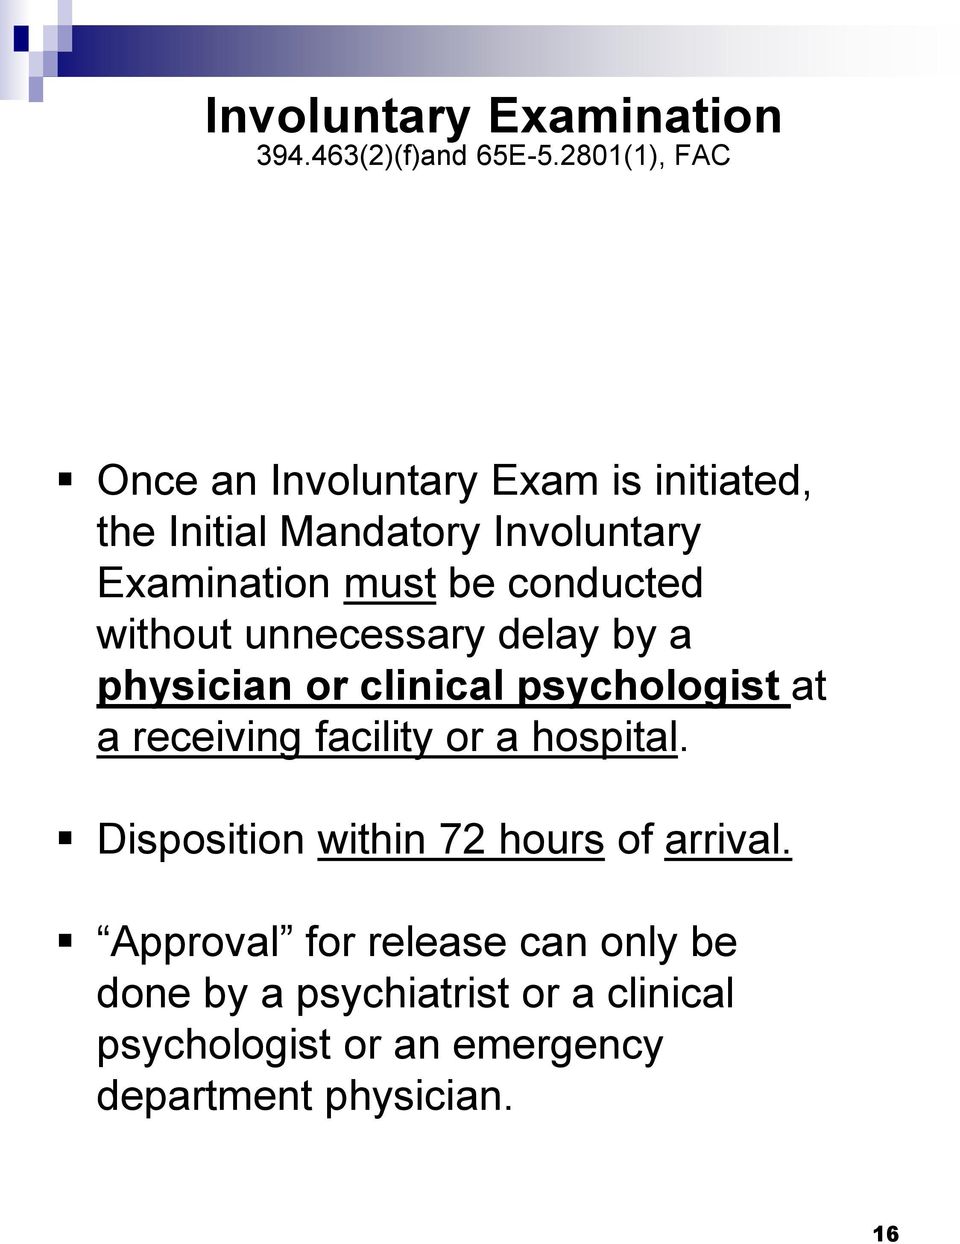 conducted without unnecessary delay by a physician or clinical psychologist at a receiving facility or a